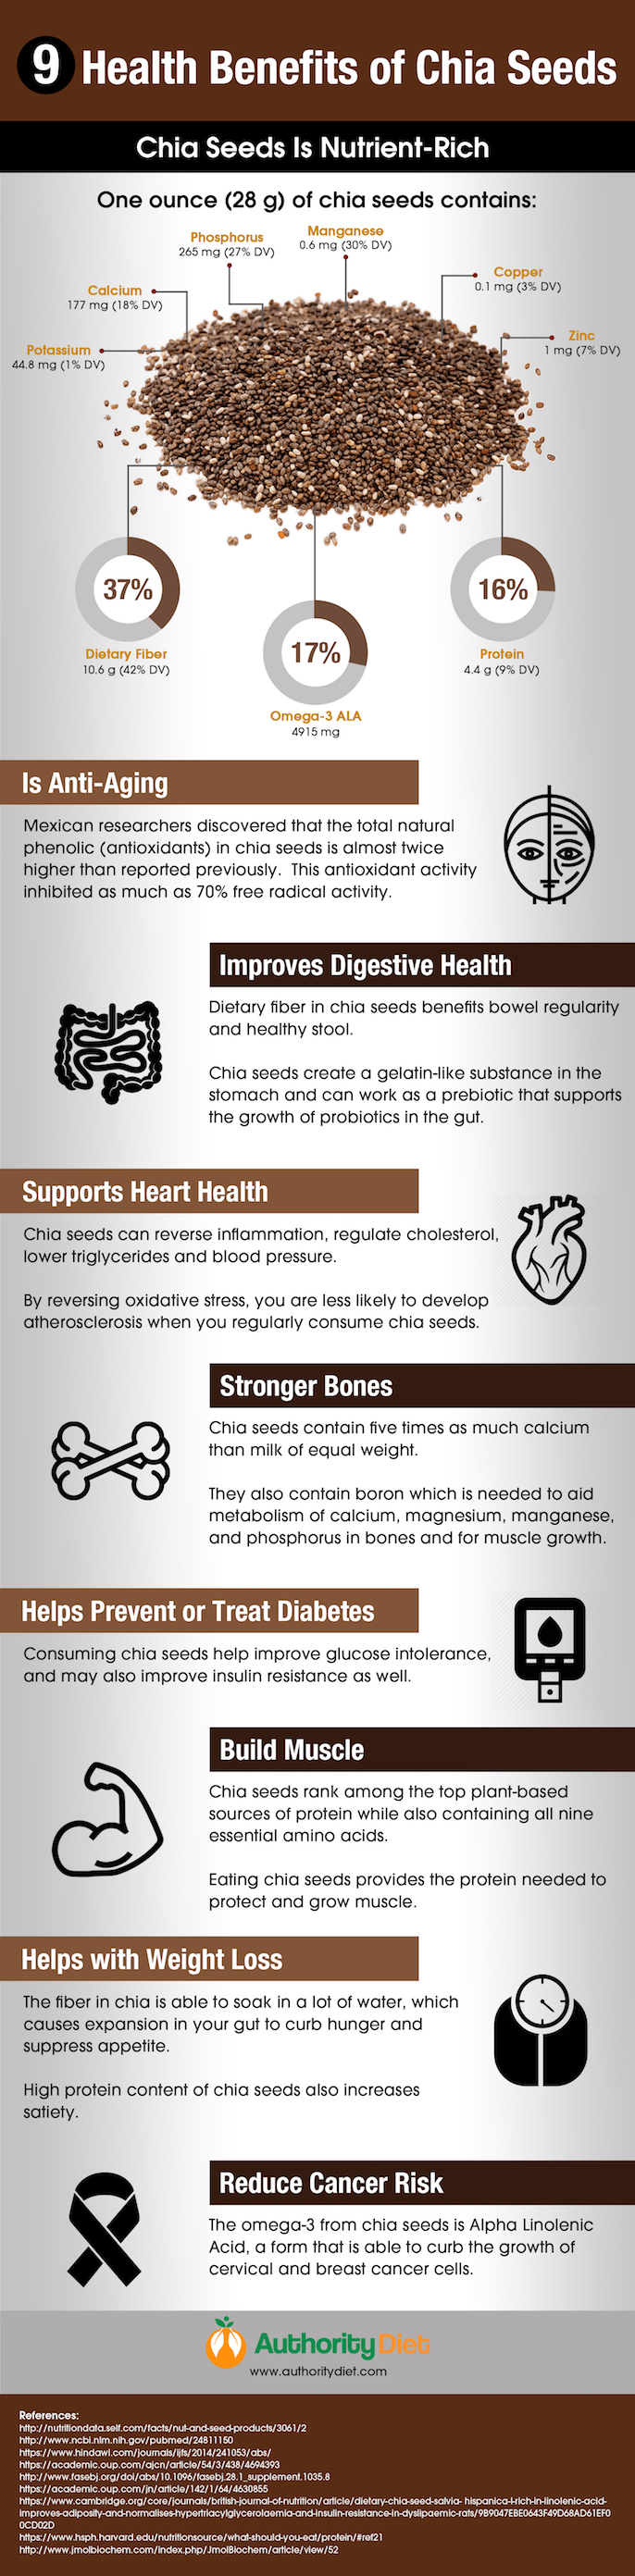 health benefits of chia seeds infographic